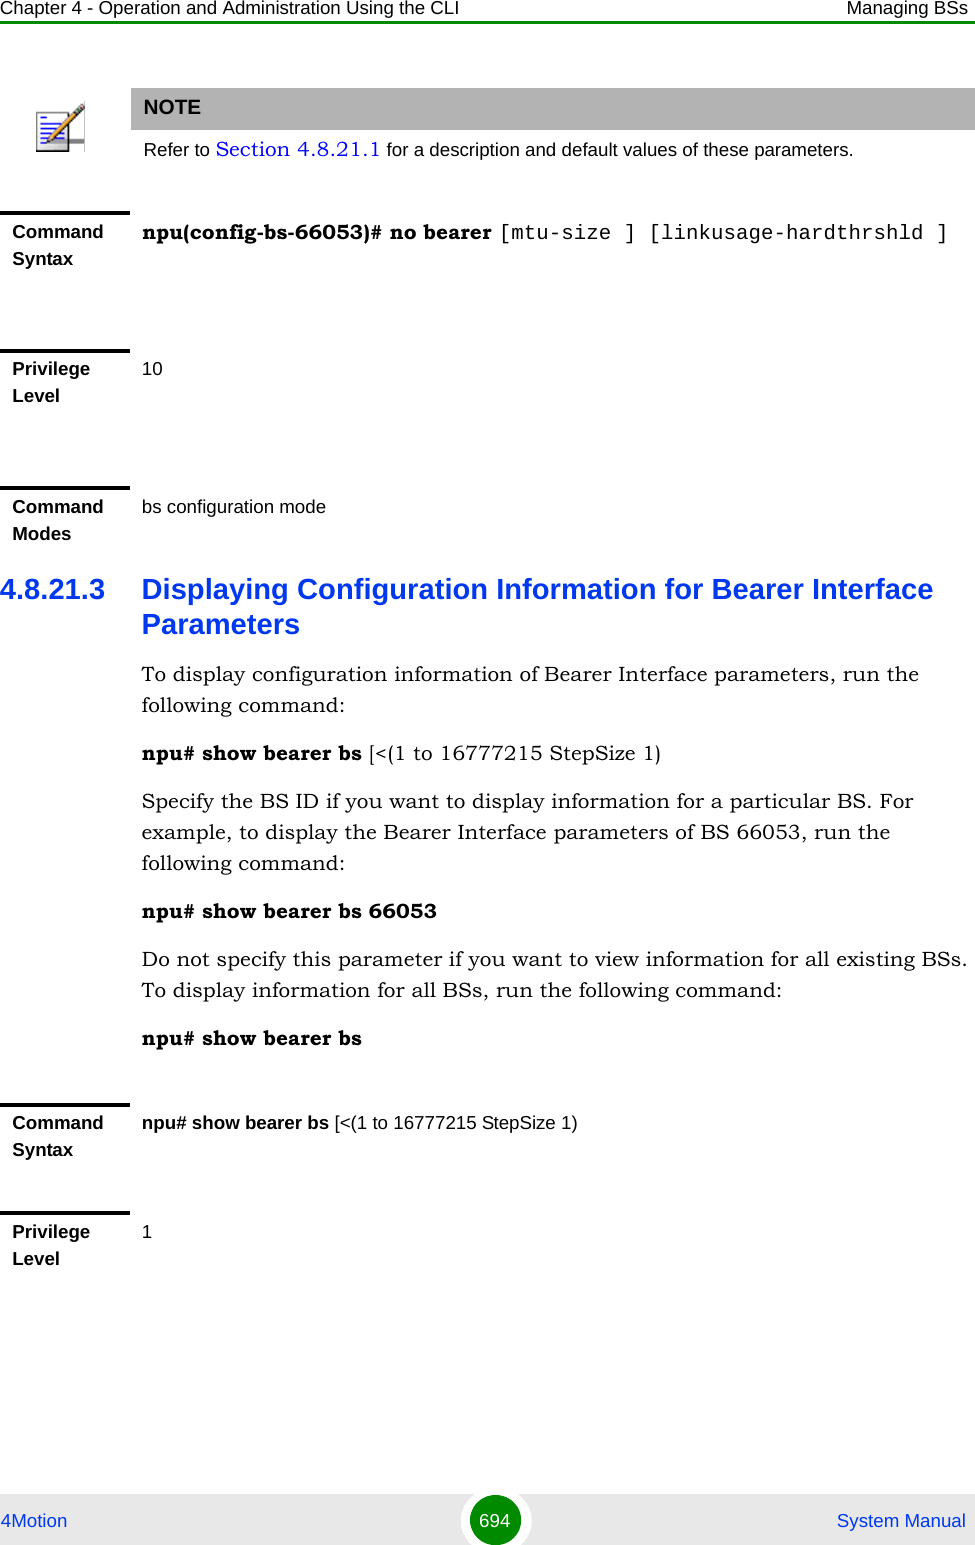 Chapter 4 - Operation and Administration Using the CLI Managing BSs4Motion 694  System Manual4.8.21.3 Displaying Configuration Information for Bearer Interface ParametersTo display configuration information of Bearer Interface parameters, run the following command:npu# show bearer bs [&lt;(1 to 16777215 StepSize 1)Specify the BS ID if you want to display information for a particular BS. For example, to display the Bearer Interface parameters of BS 66053, run the following command:npu# show bearer bs 66053Do not specify this parameter if you want to view information for all existing BSs. To display information for all BSs, run the following command:npu# show bearer bsNOTERefer to Section 4.8.21.1 for a description and default values of these parameters.Command Syntaxnpu(config-bs-66053)# no bearer [mtu-size ] [linkusage-hardthrshld ]Privilege Level10Command Modesbs configuration modeCommand Syntaxnpu# show bearer bs [&lt;(1 to 16777215 StepSize 1)Privilege Level1